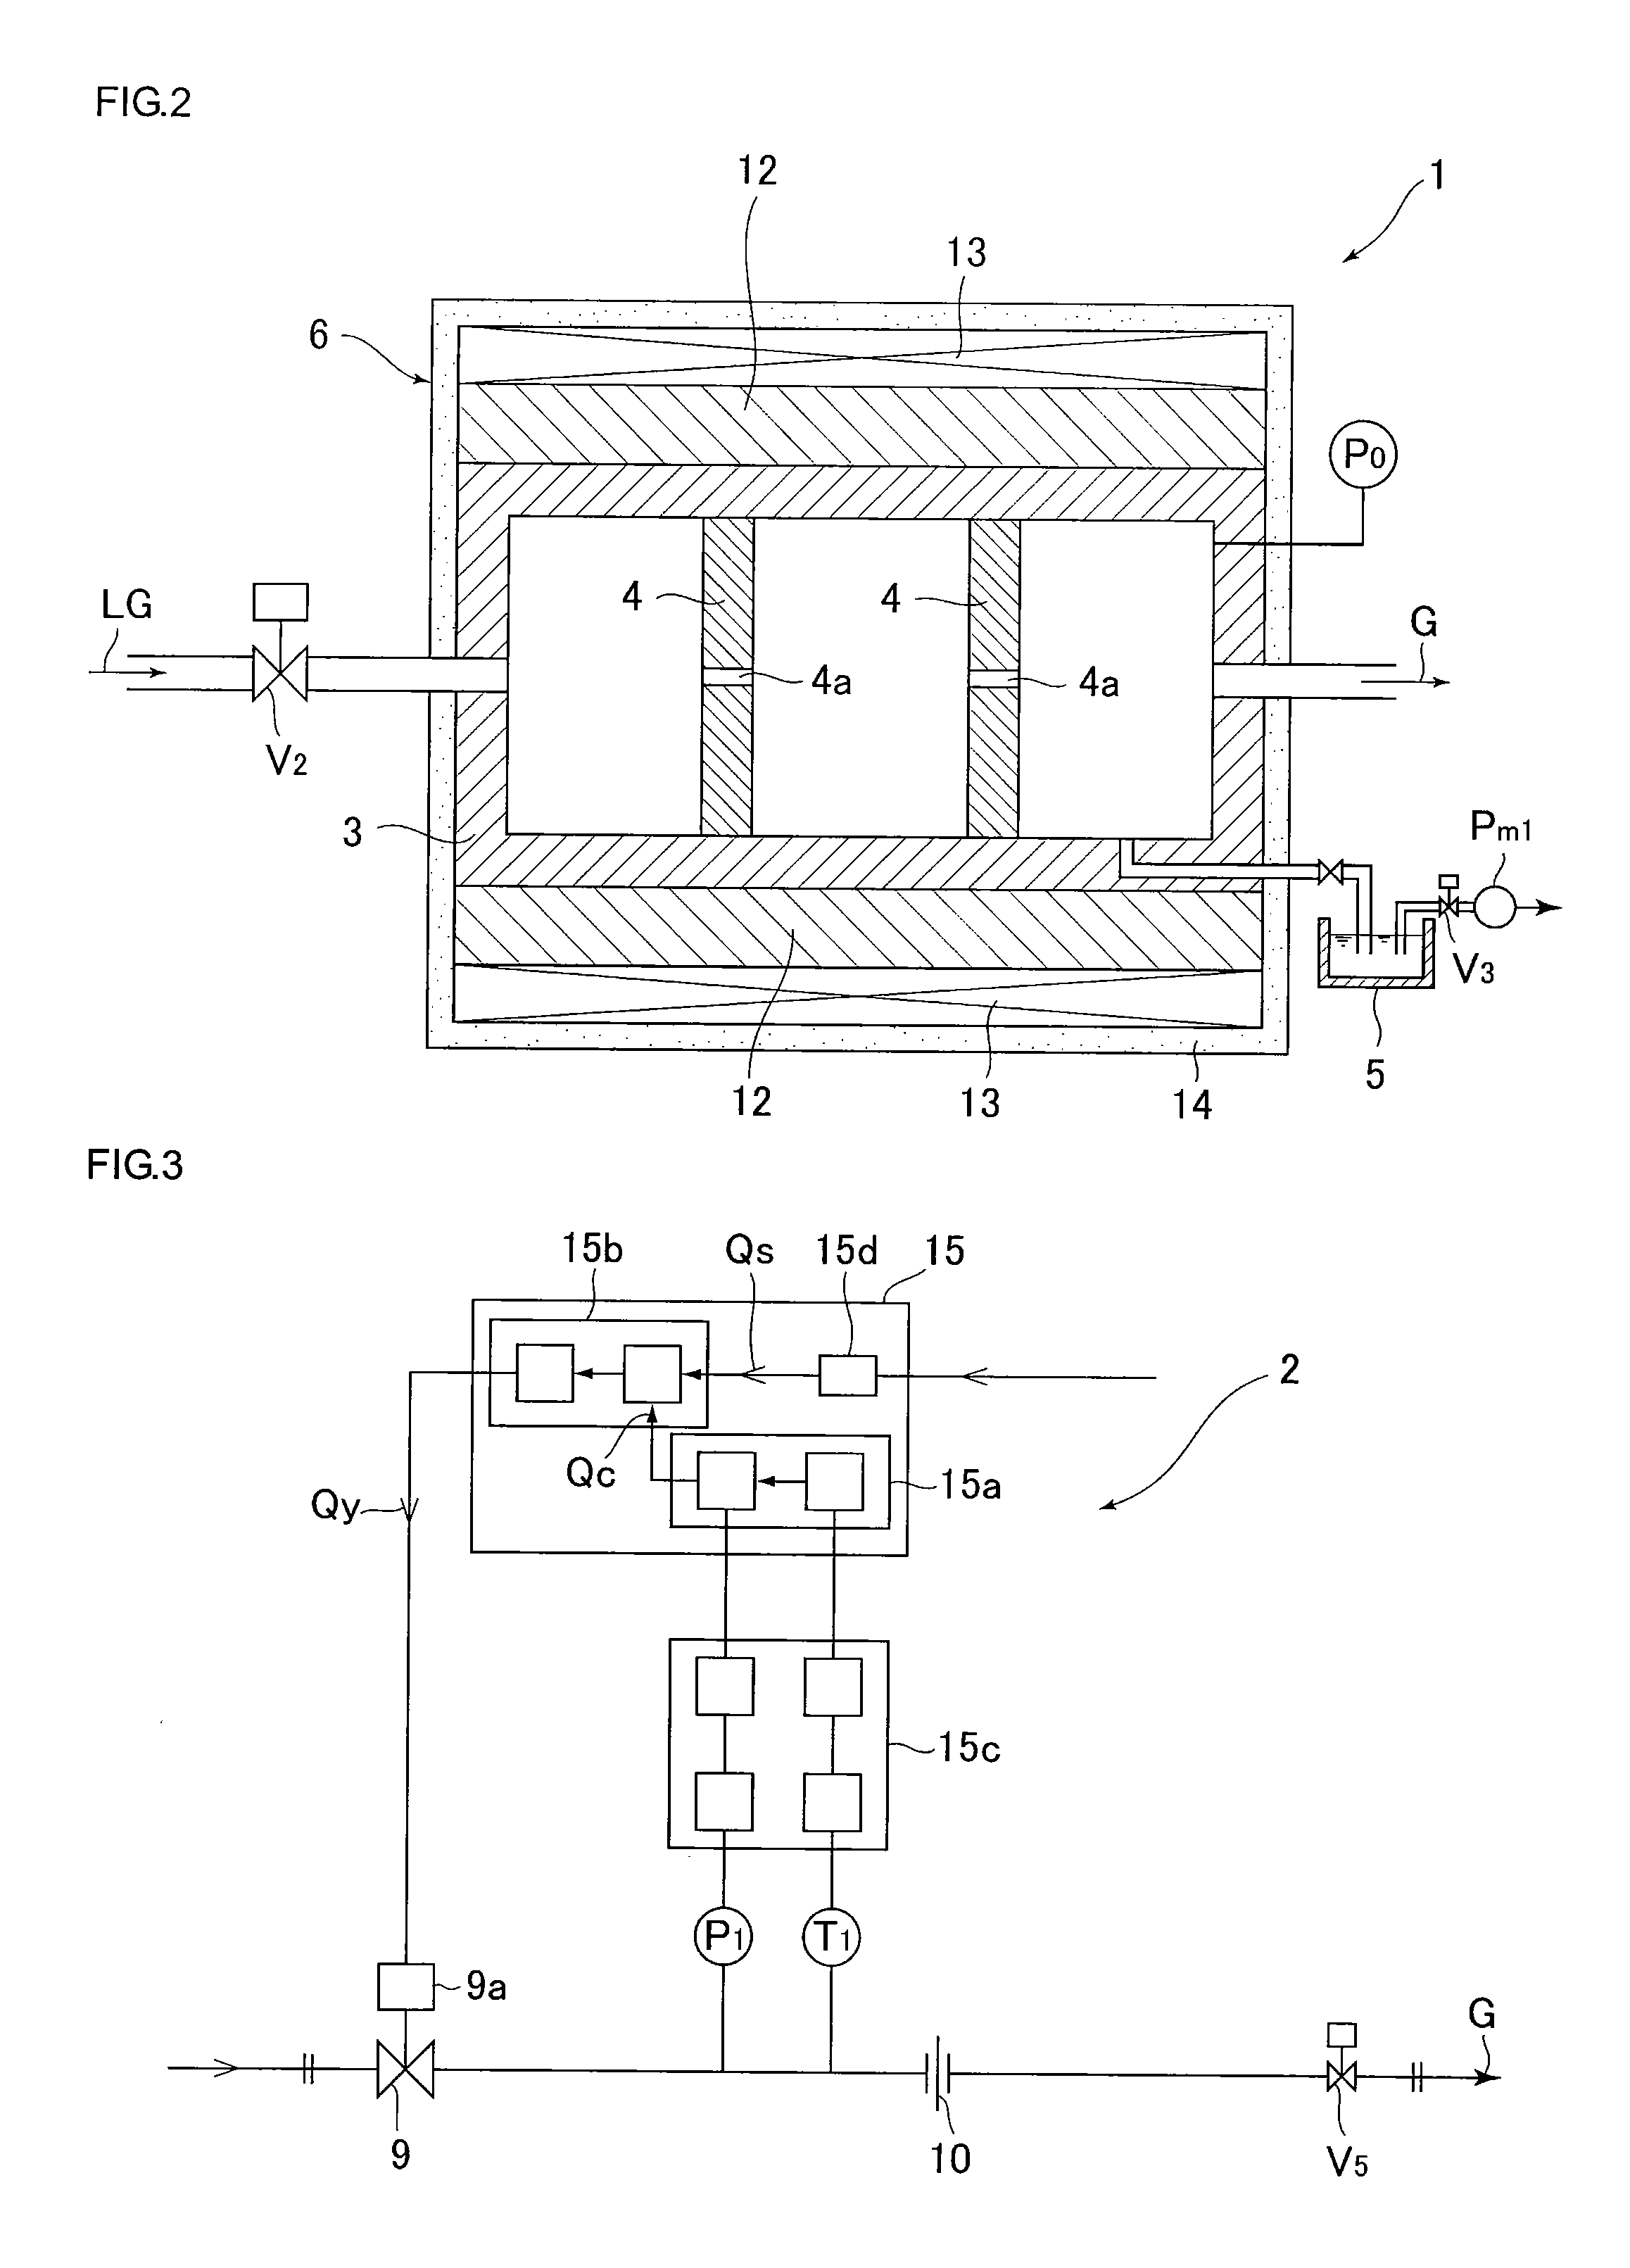 Gas supply apparatus equipped with vaporizer